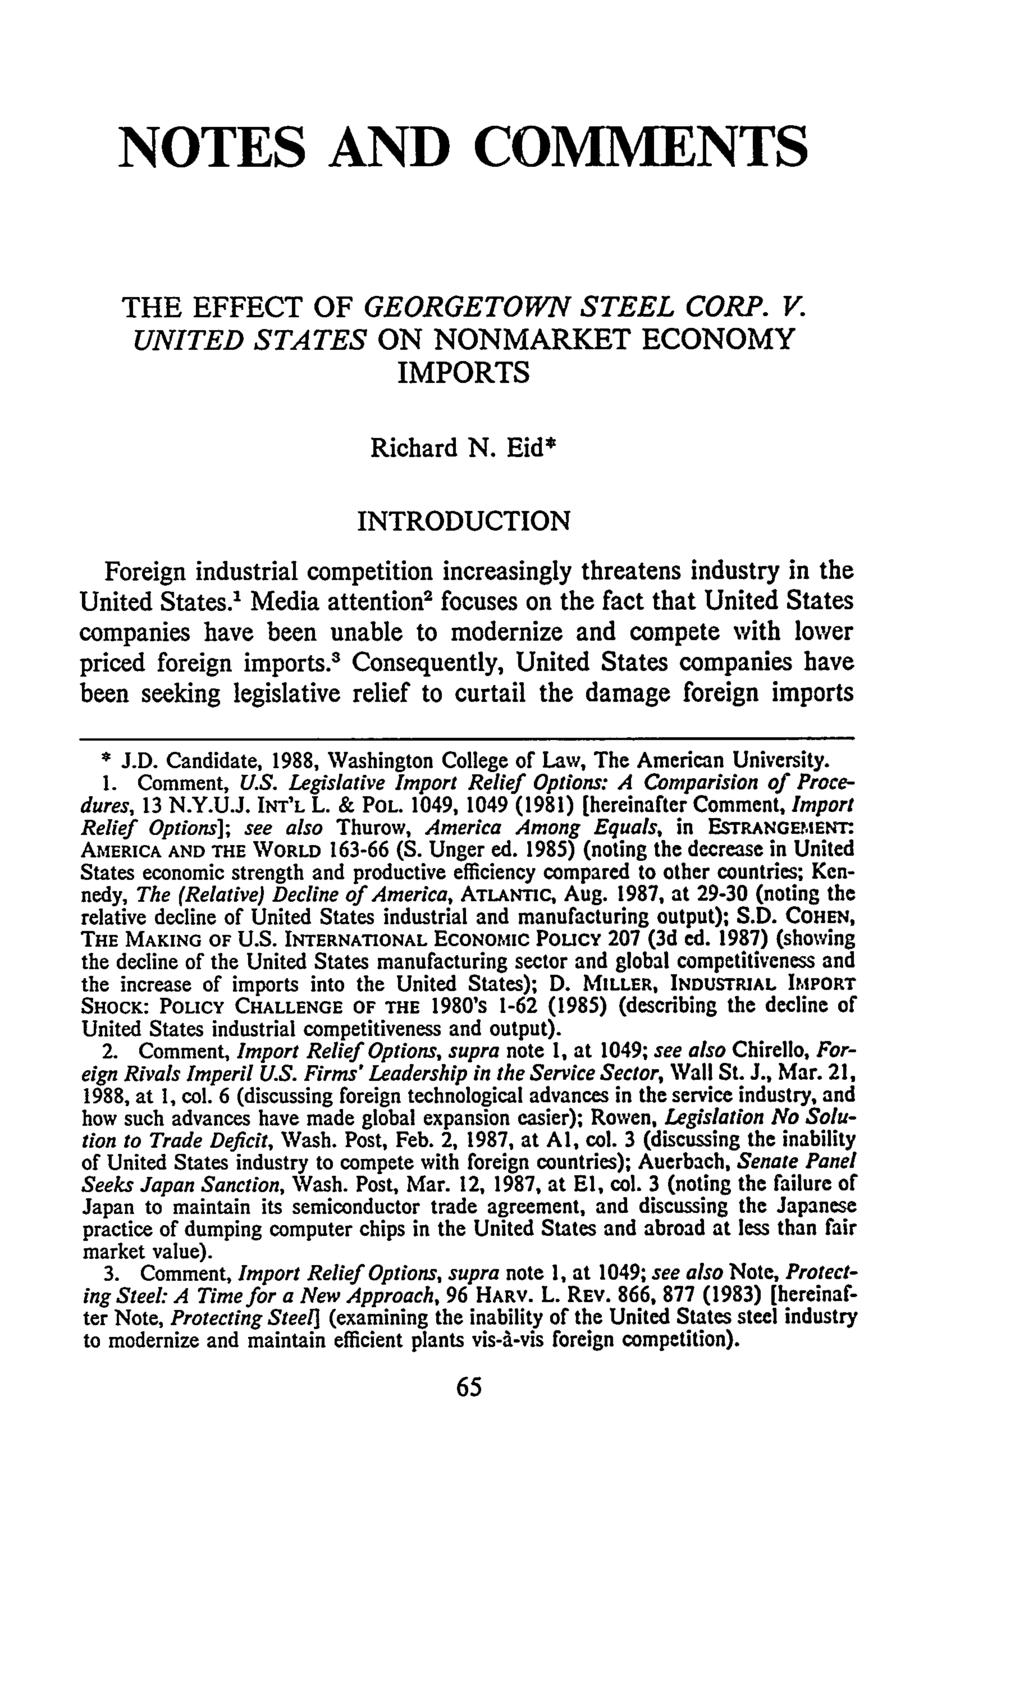 NOTES AND COMMENTS THE EFFECT OF GEORGETOWN STEEL CORP. V. UNITED STATES ON NONMARKET ECONOMY IMPORTS Richard N.